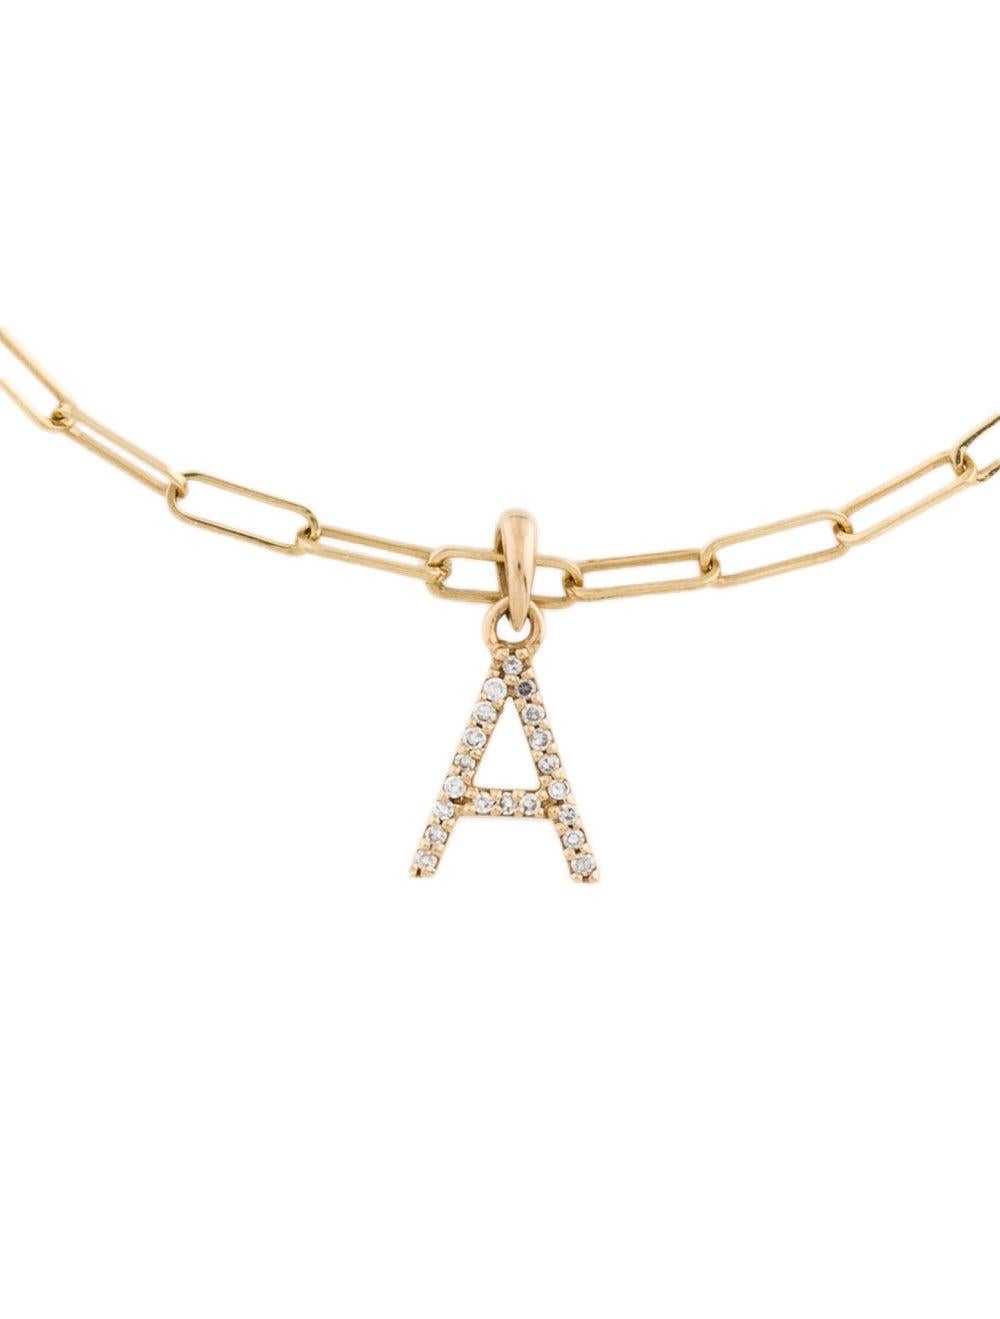 This is an adorable Initial Letter Bracelet crafted of 14k Rose Gold with approximately 0.05 ct. Round Sparkly Diamonds. Diamond Color and Clarity GH-SI1-SI2. Comes on an 7